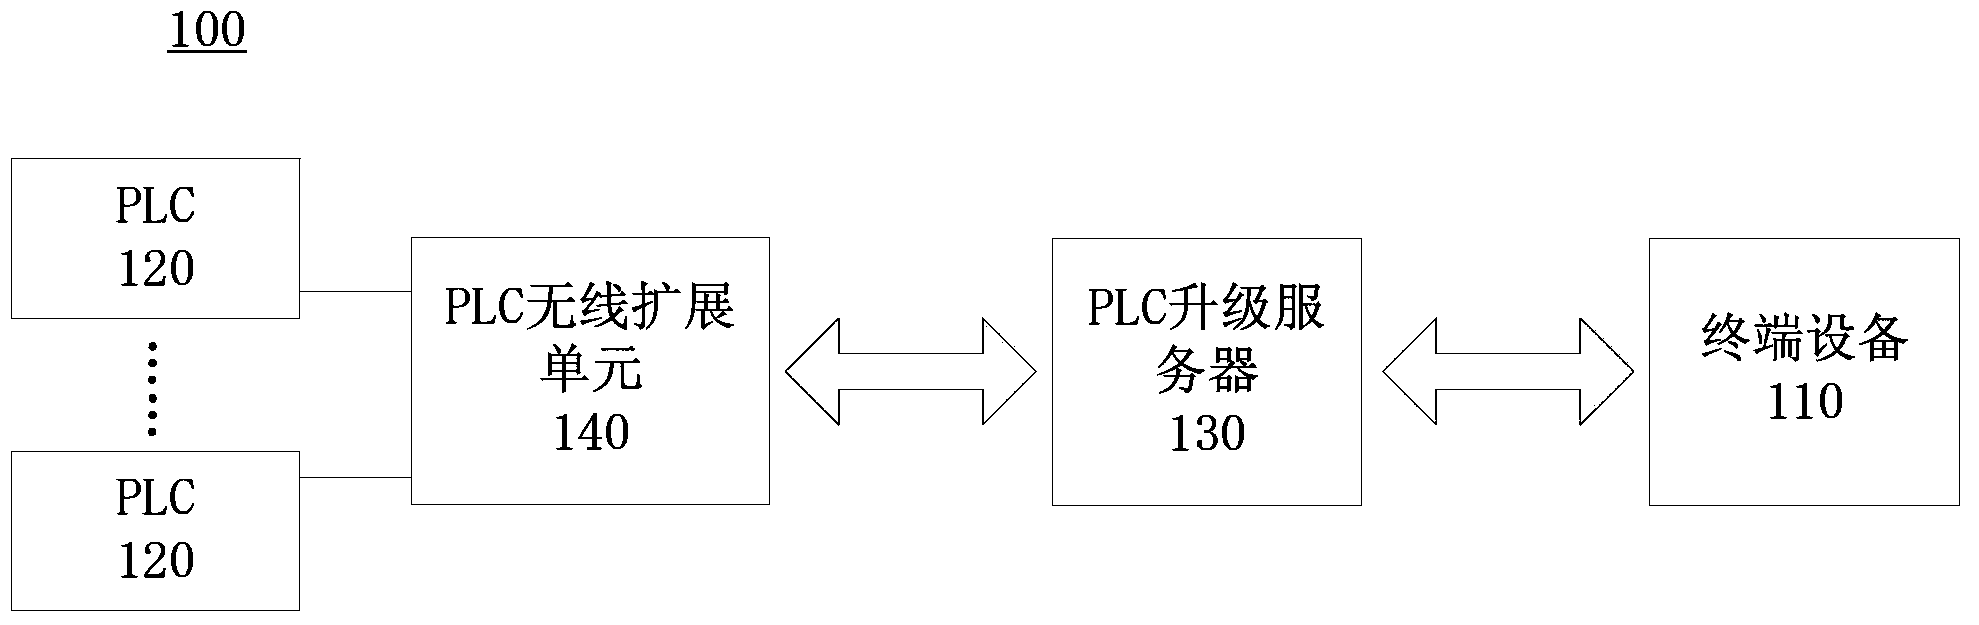 Method and system for remote upgrade of PLC (Programmable Logic Controller)